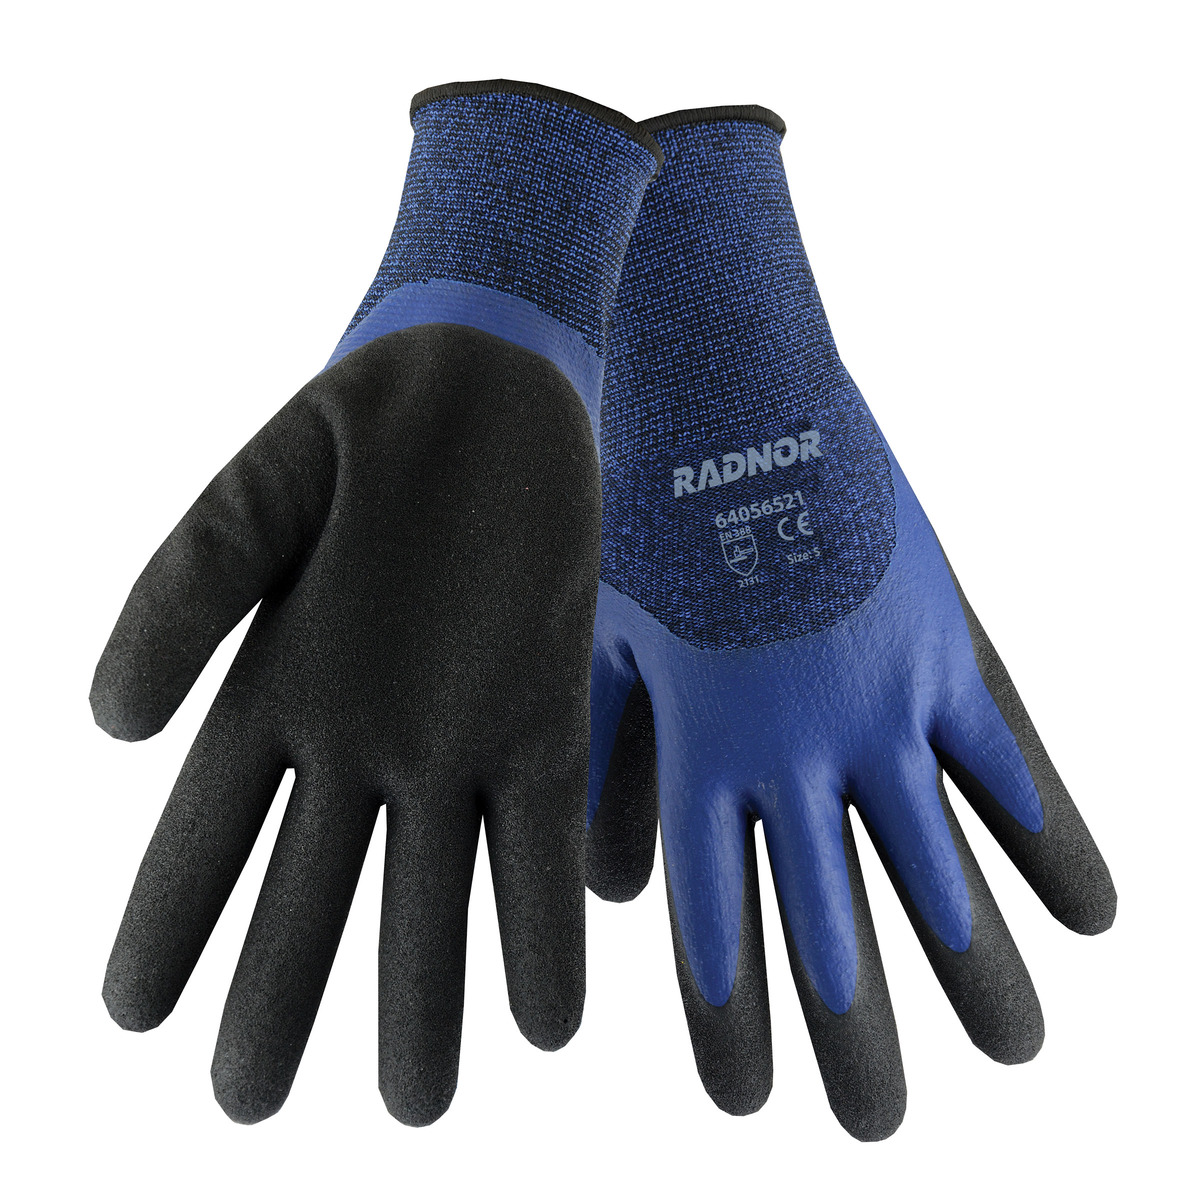 Cold - Latex Gloves Lined Thermo Airgas X-Large Weather - Acrylic RADNOR™ 3/4 PowerGrab™ RAD64056524 Blue